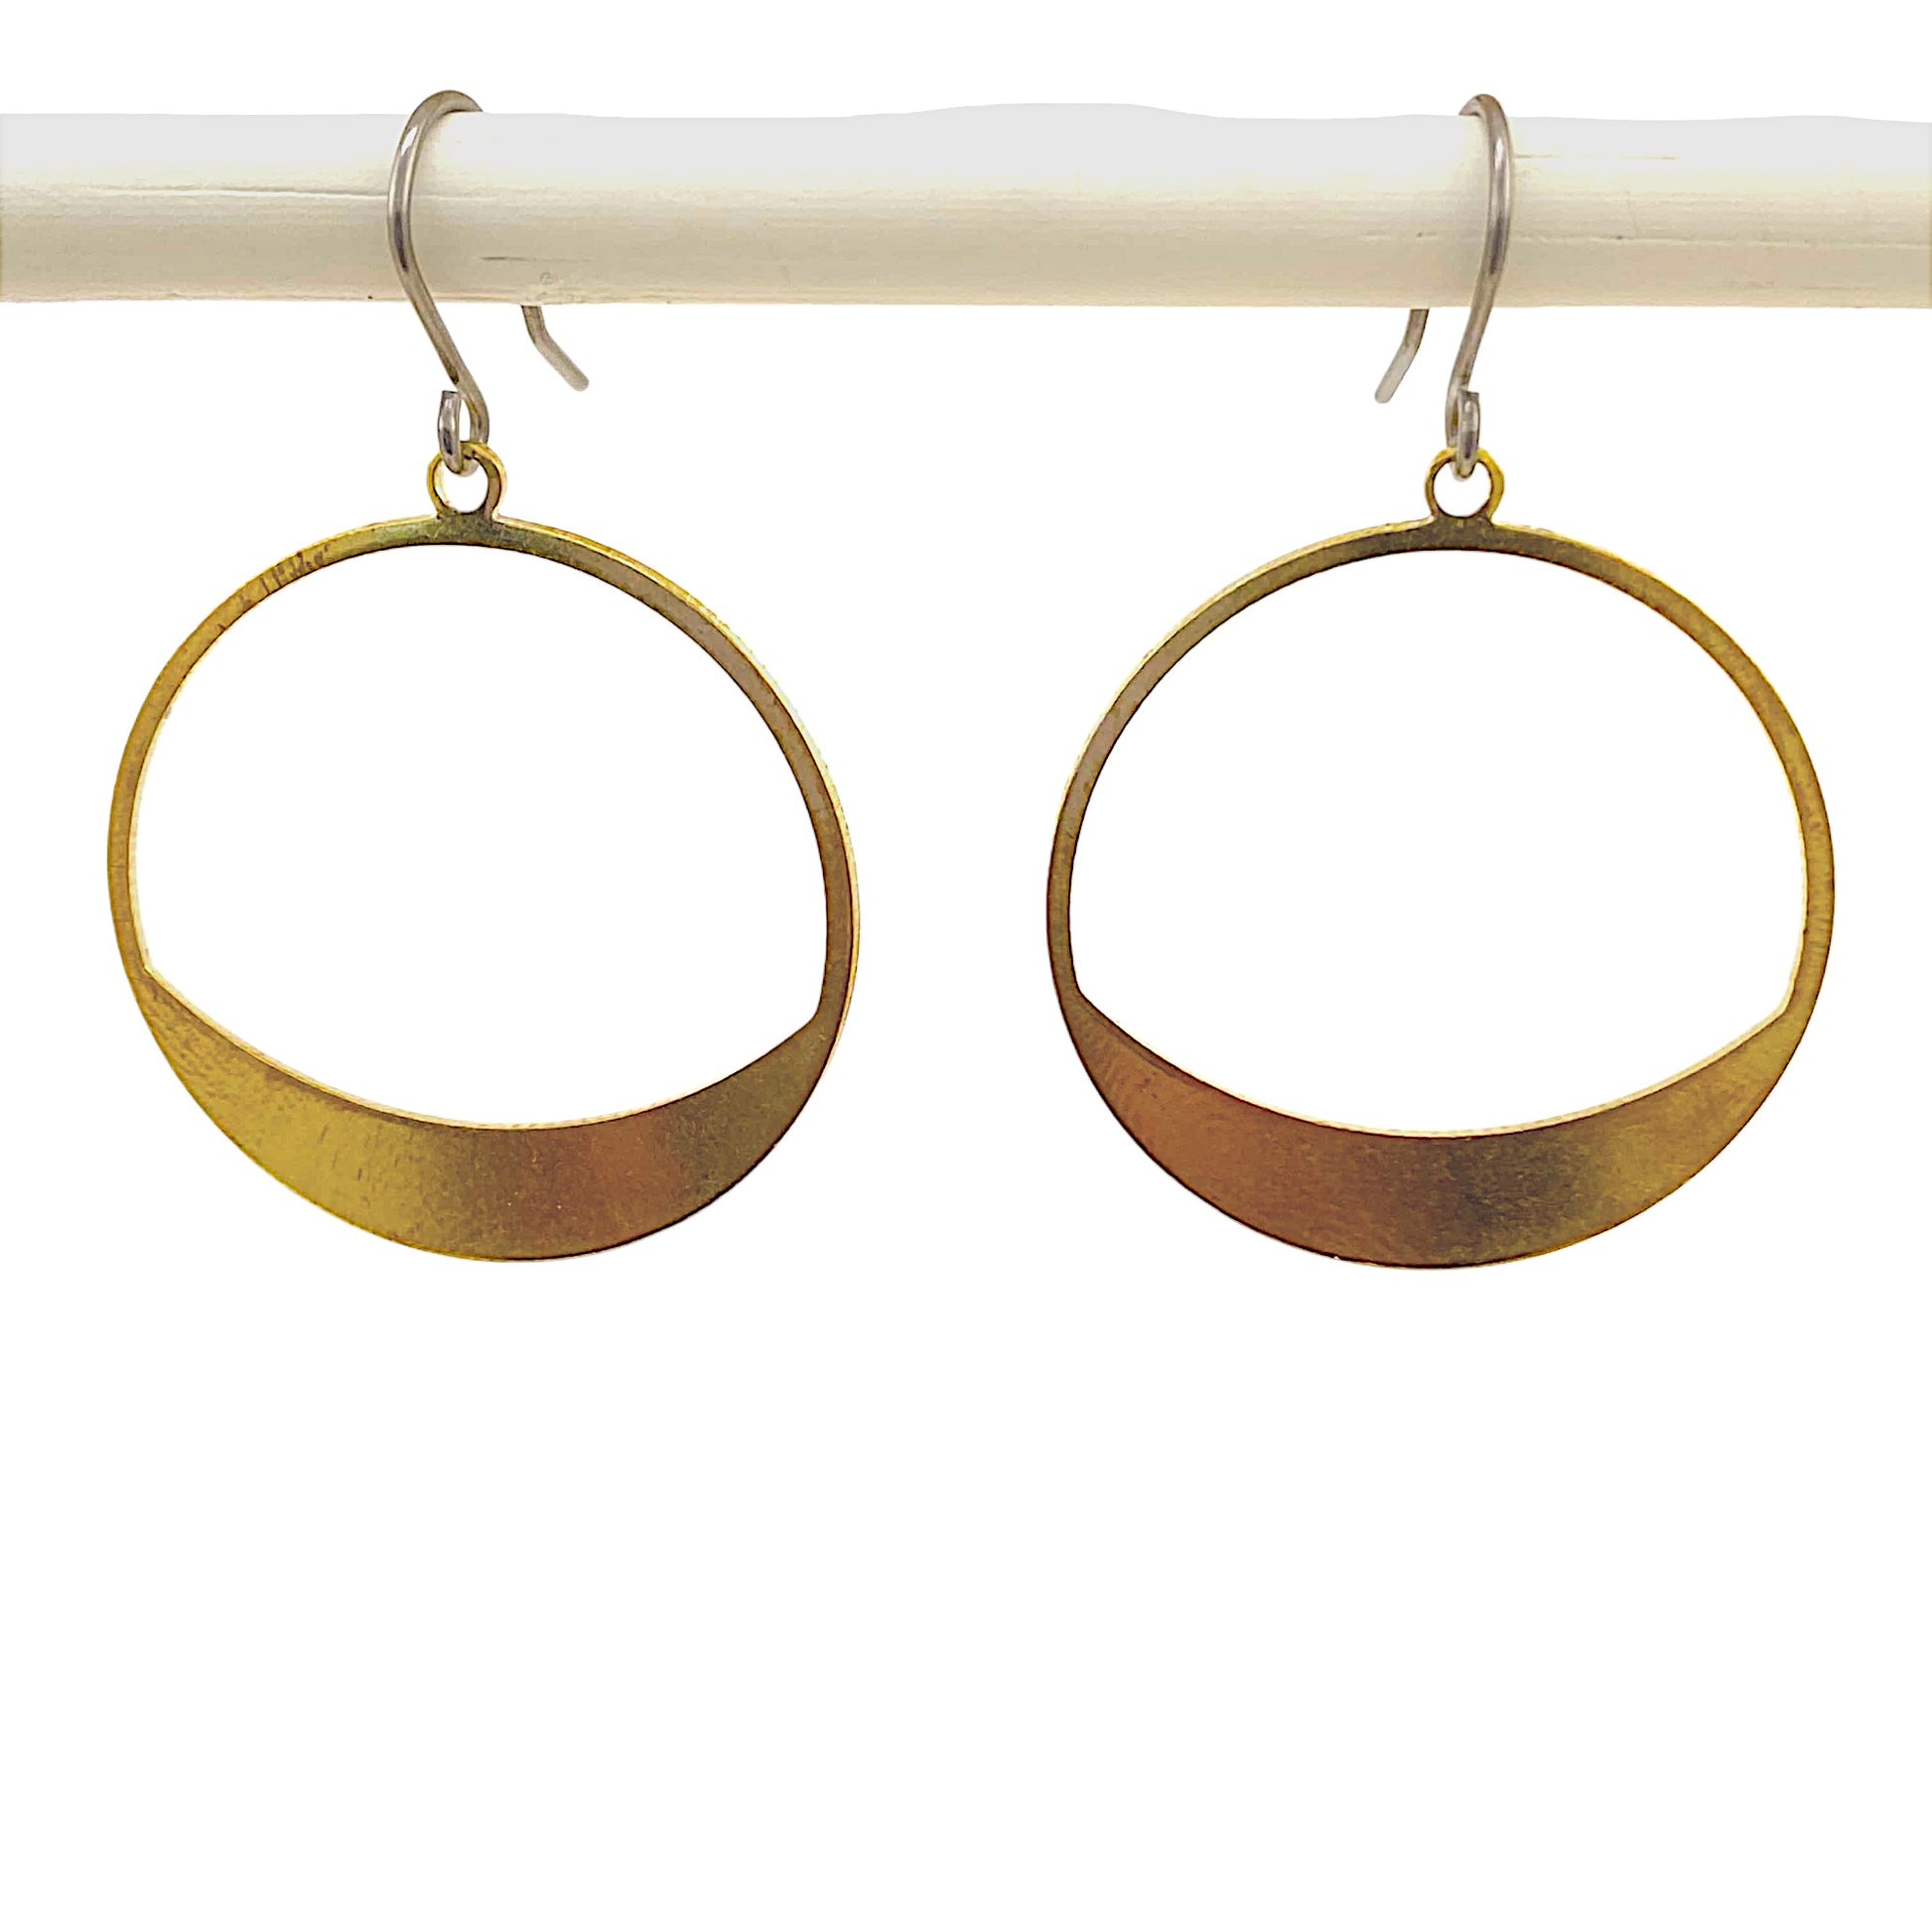 Hoop circles earring with a titanium hook on a white background